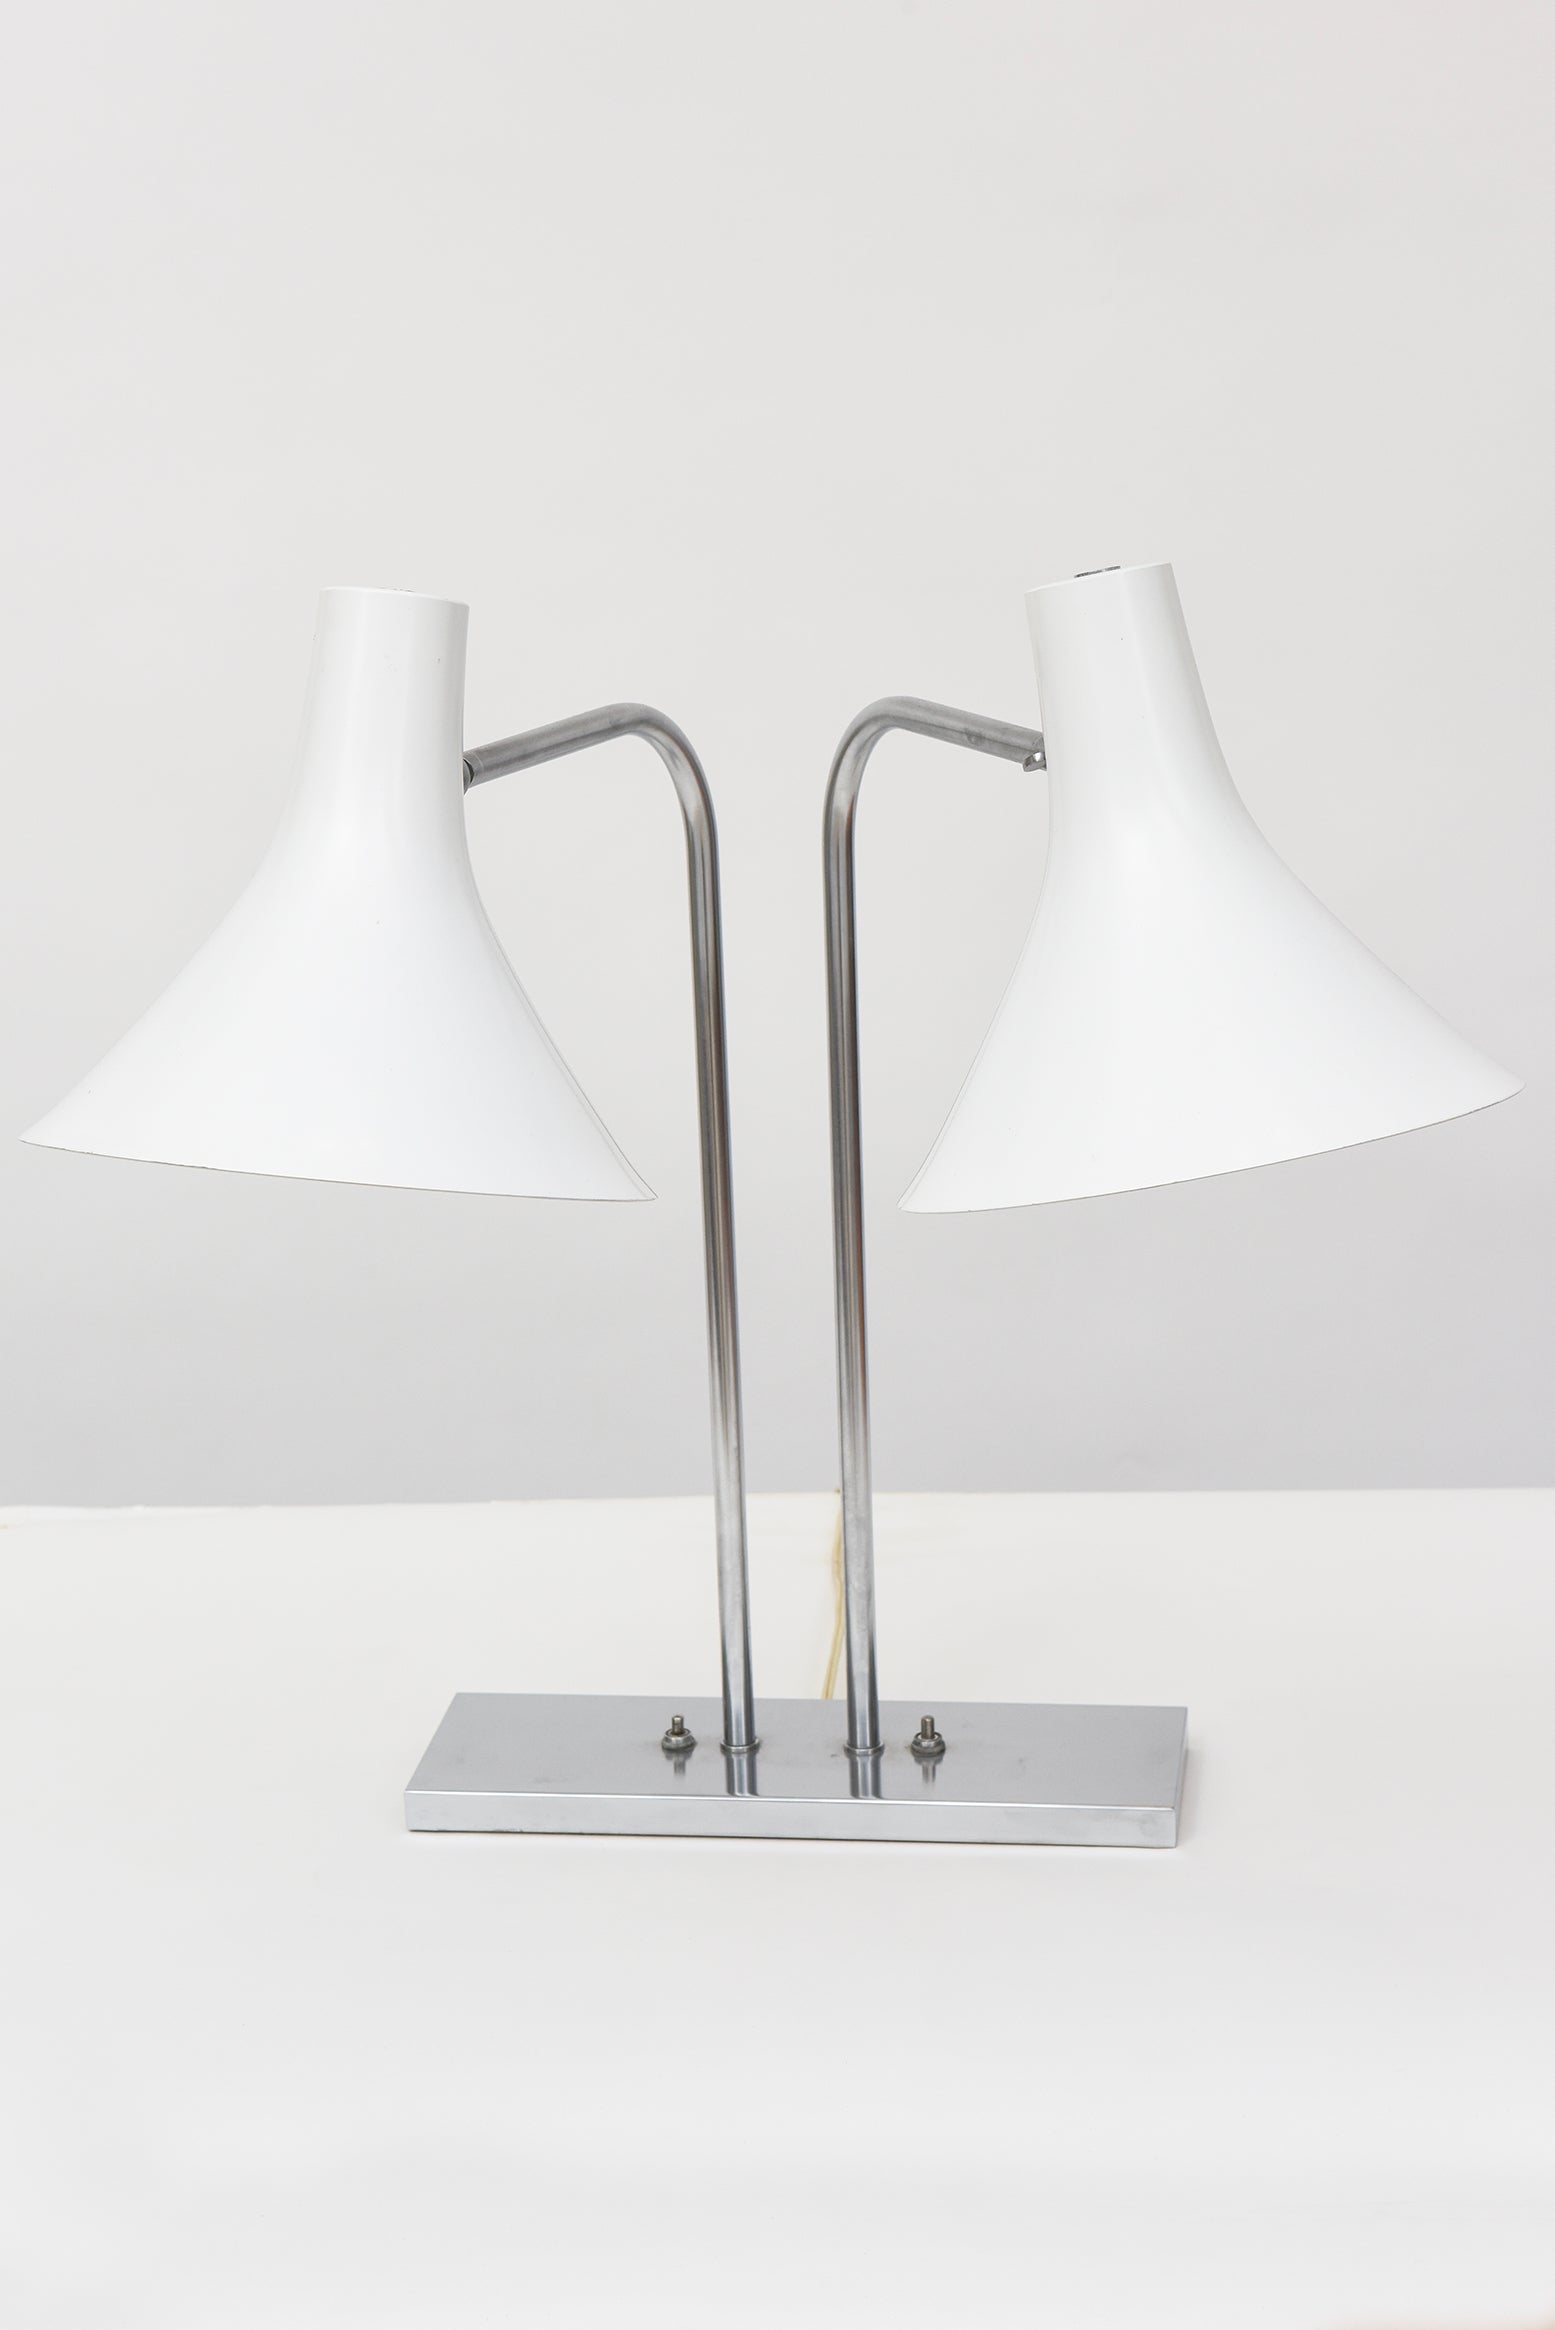 A timeless 1960s-designed double cone desk lamp by Greta Grossman for Nessen Studios with brushed nickel frame and enameled aluminum shades. Shades pivot, swivel, and lock in place to provide a myriad of lighting positions. Two small scratches on